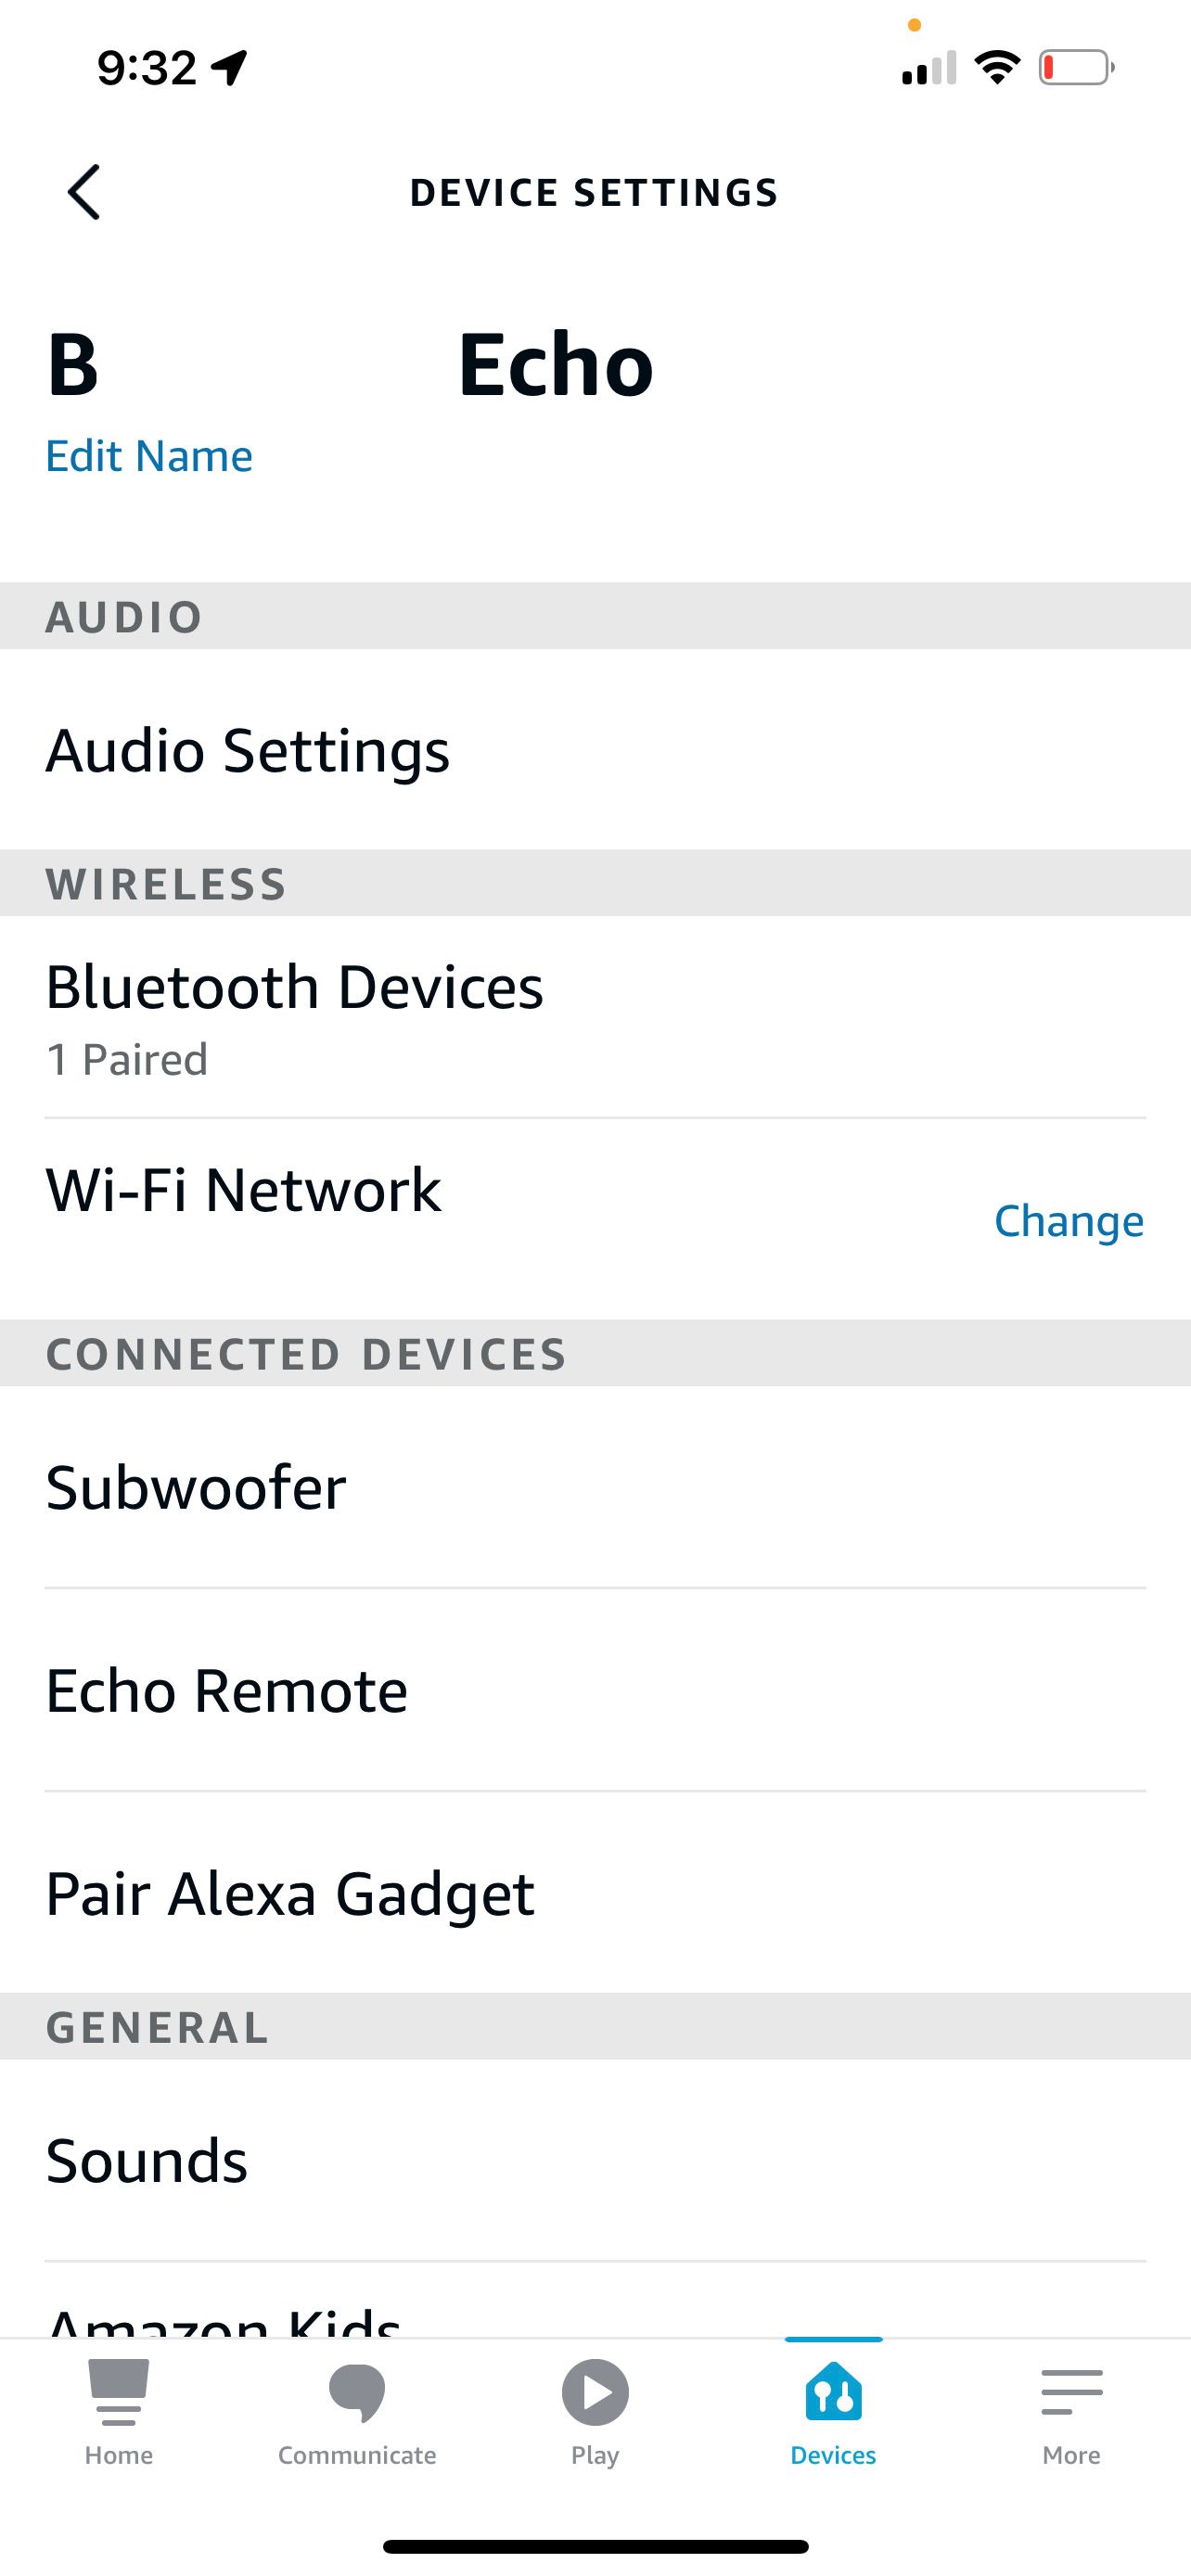 Echo device settings including Bluetooth Devices under wireless settings.